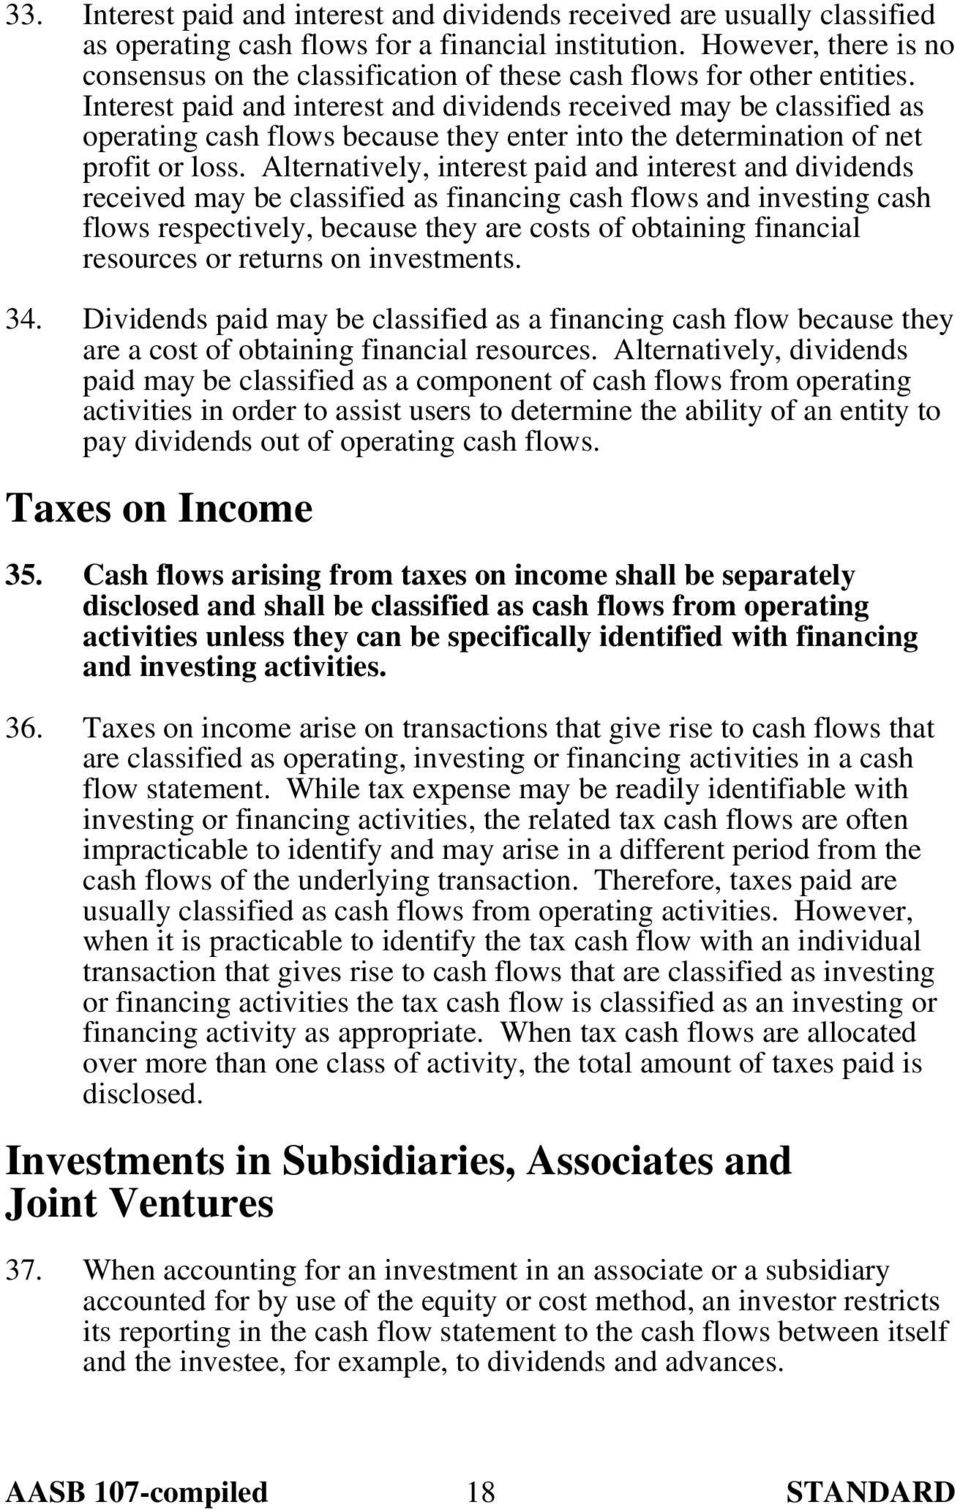 Interest paid and interest and dividends received may be classified as operating cash flows because they enter into the determination of net profit or loss.